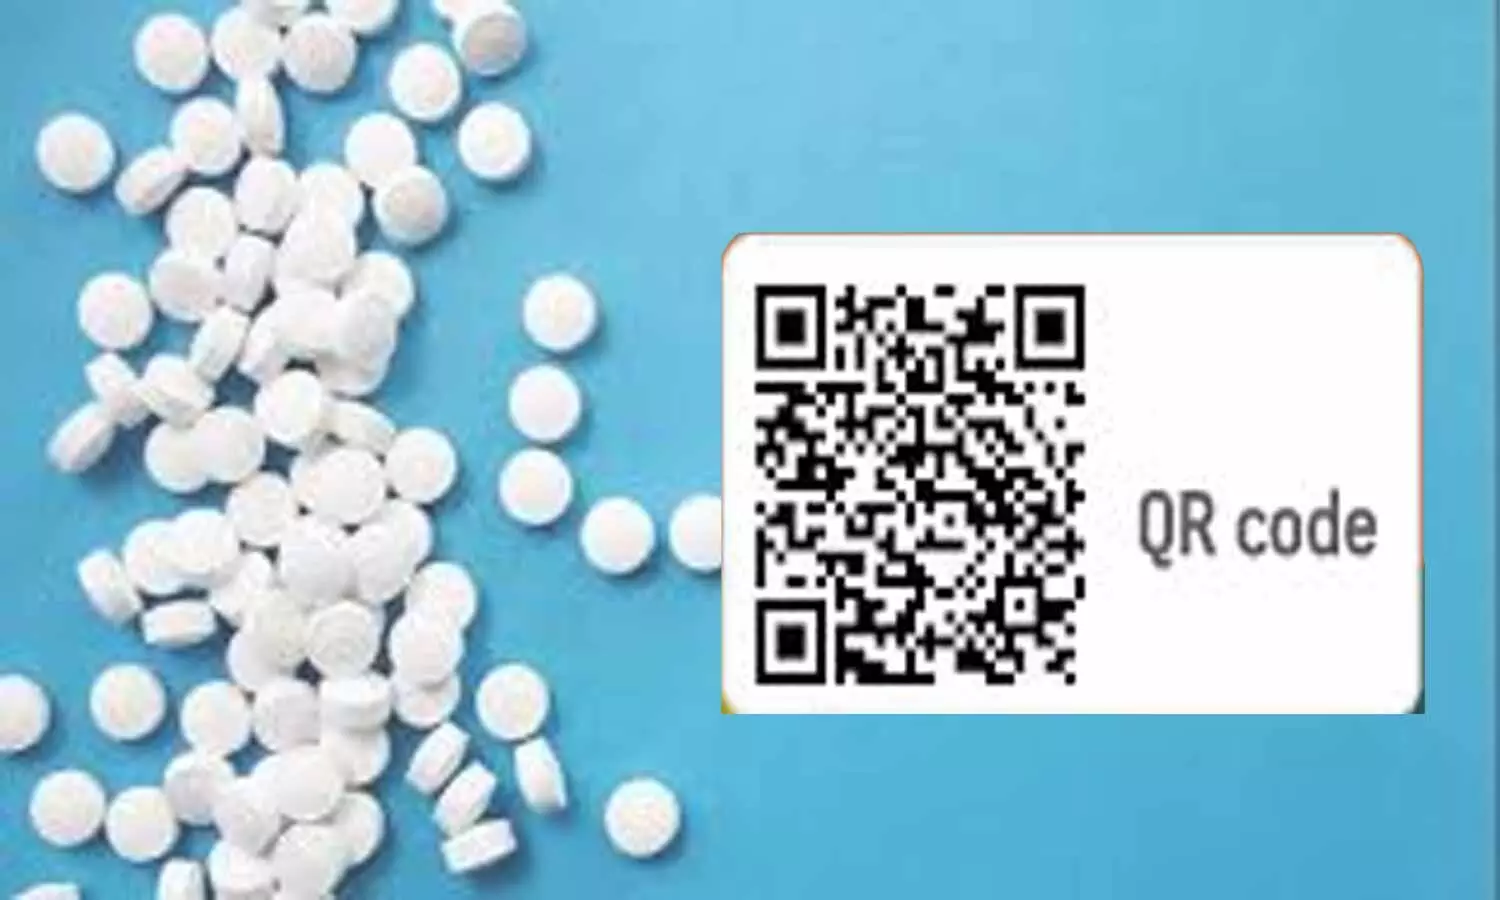 These 300 medicines have been finalised for QR code